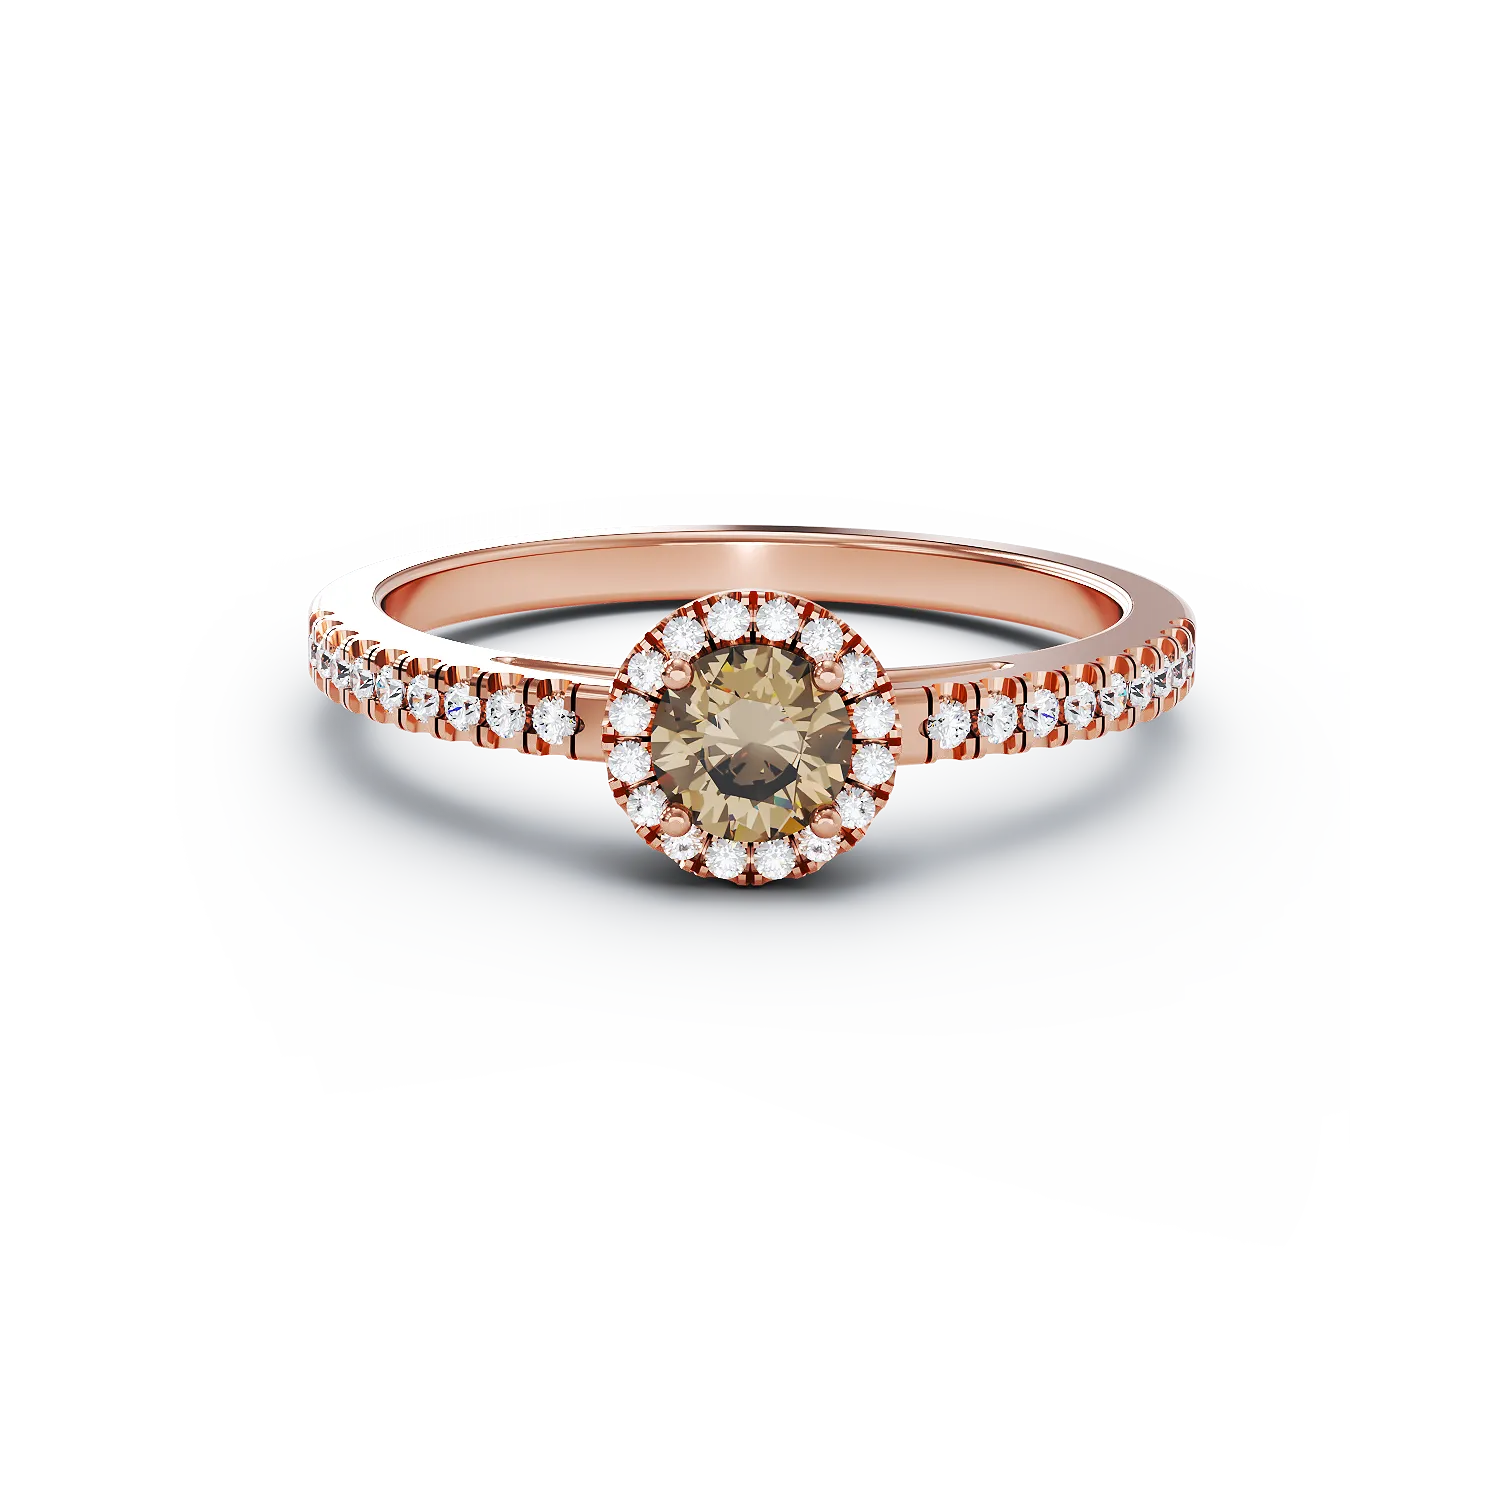 18K rose gold engagement ring with 0.51ct brown diamond and 0.21ct diamonds